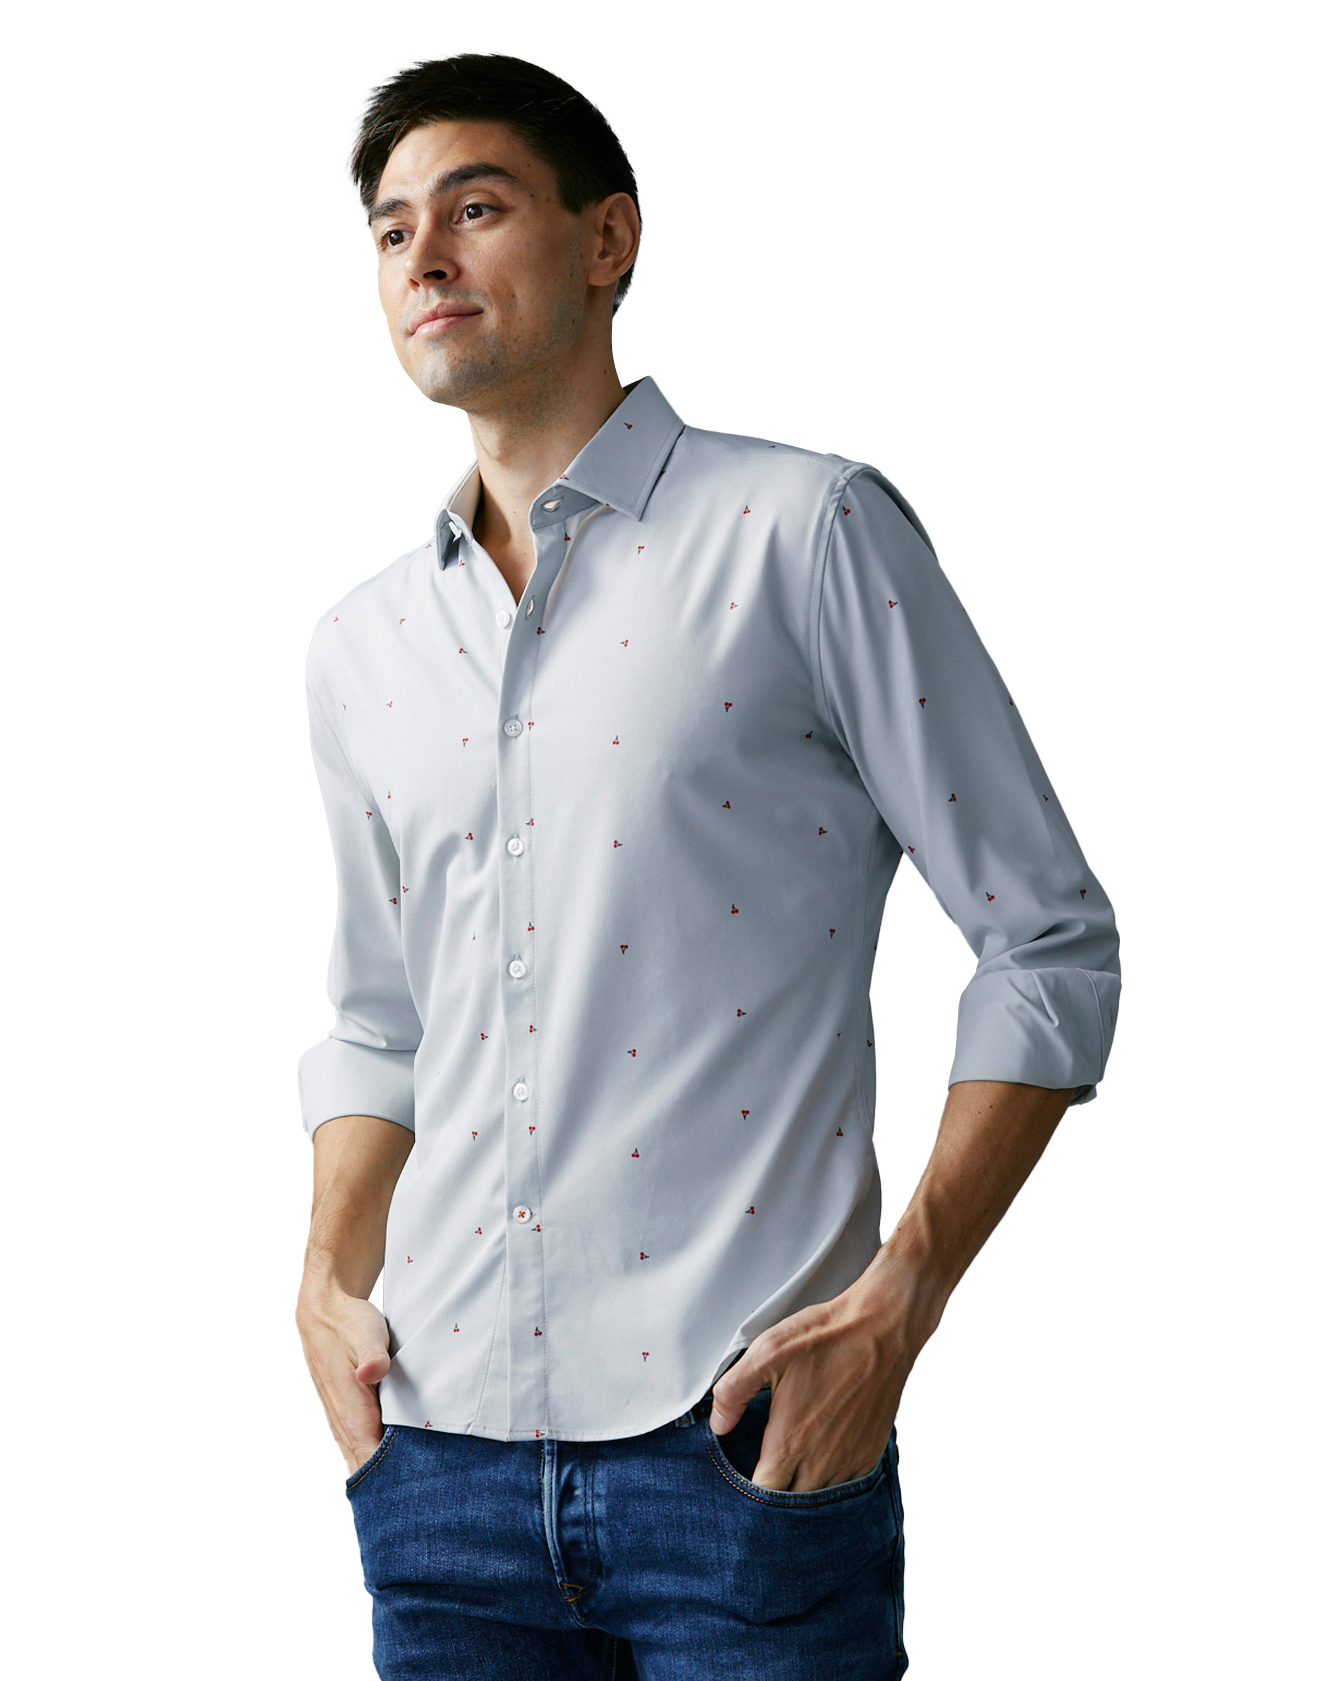 Fashion Business Shirt Anti-wrinkle Stand Collar Slim Formal Breathable Top  - Brown @ Best Price Online